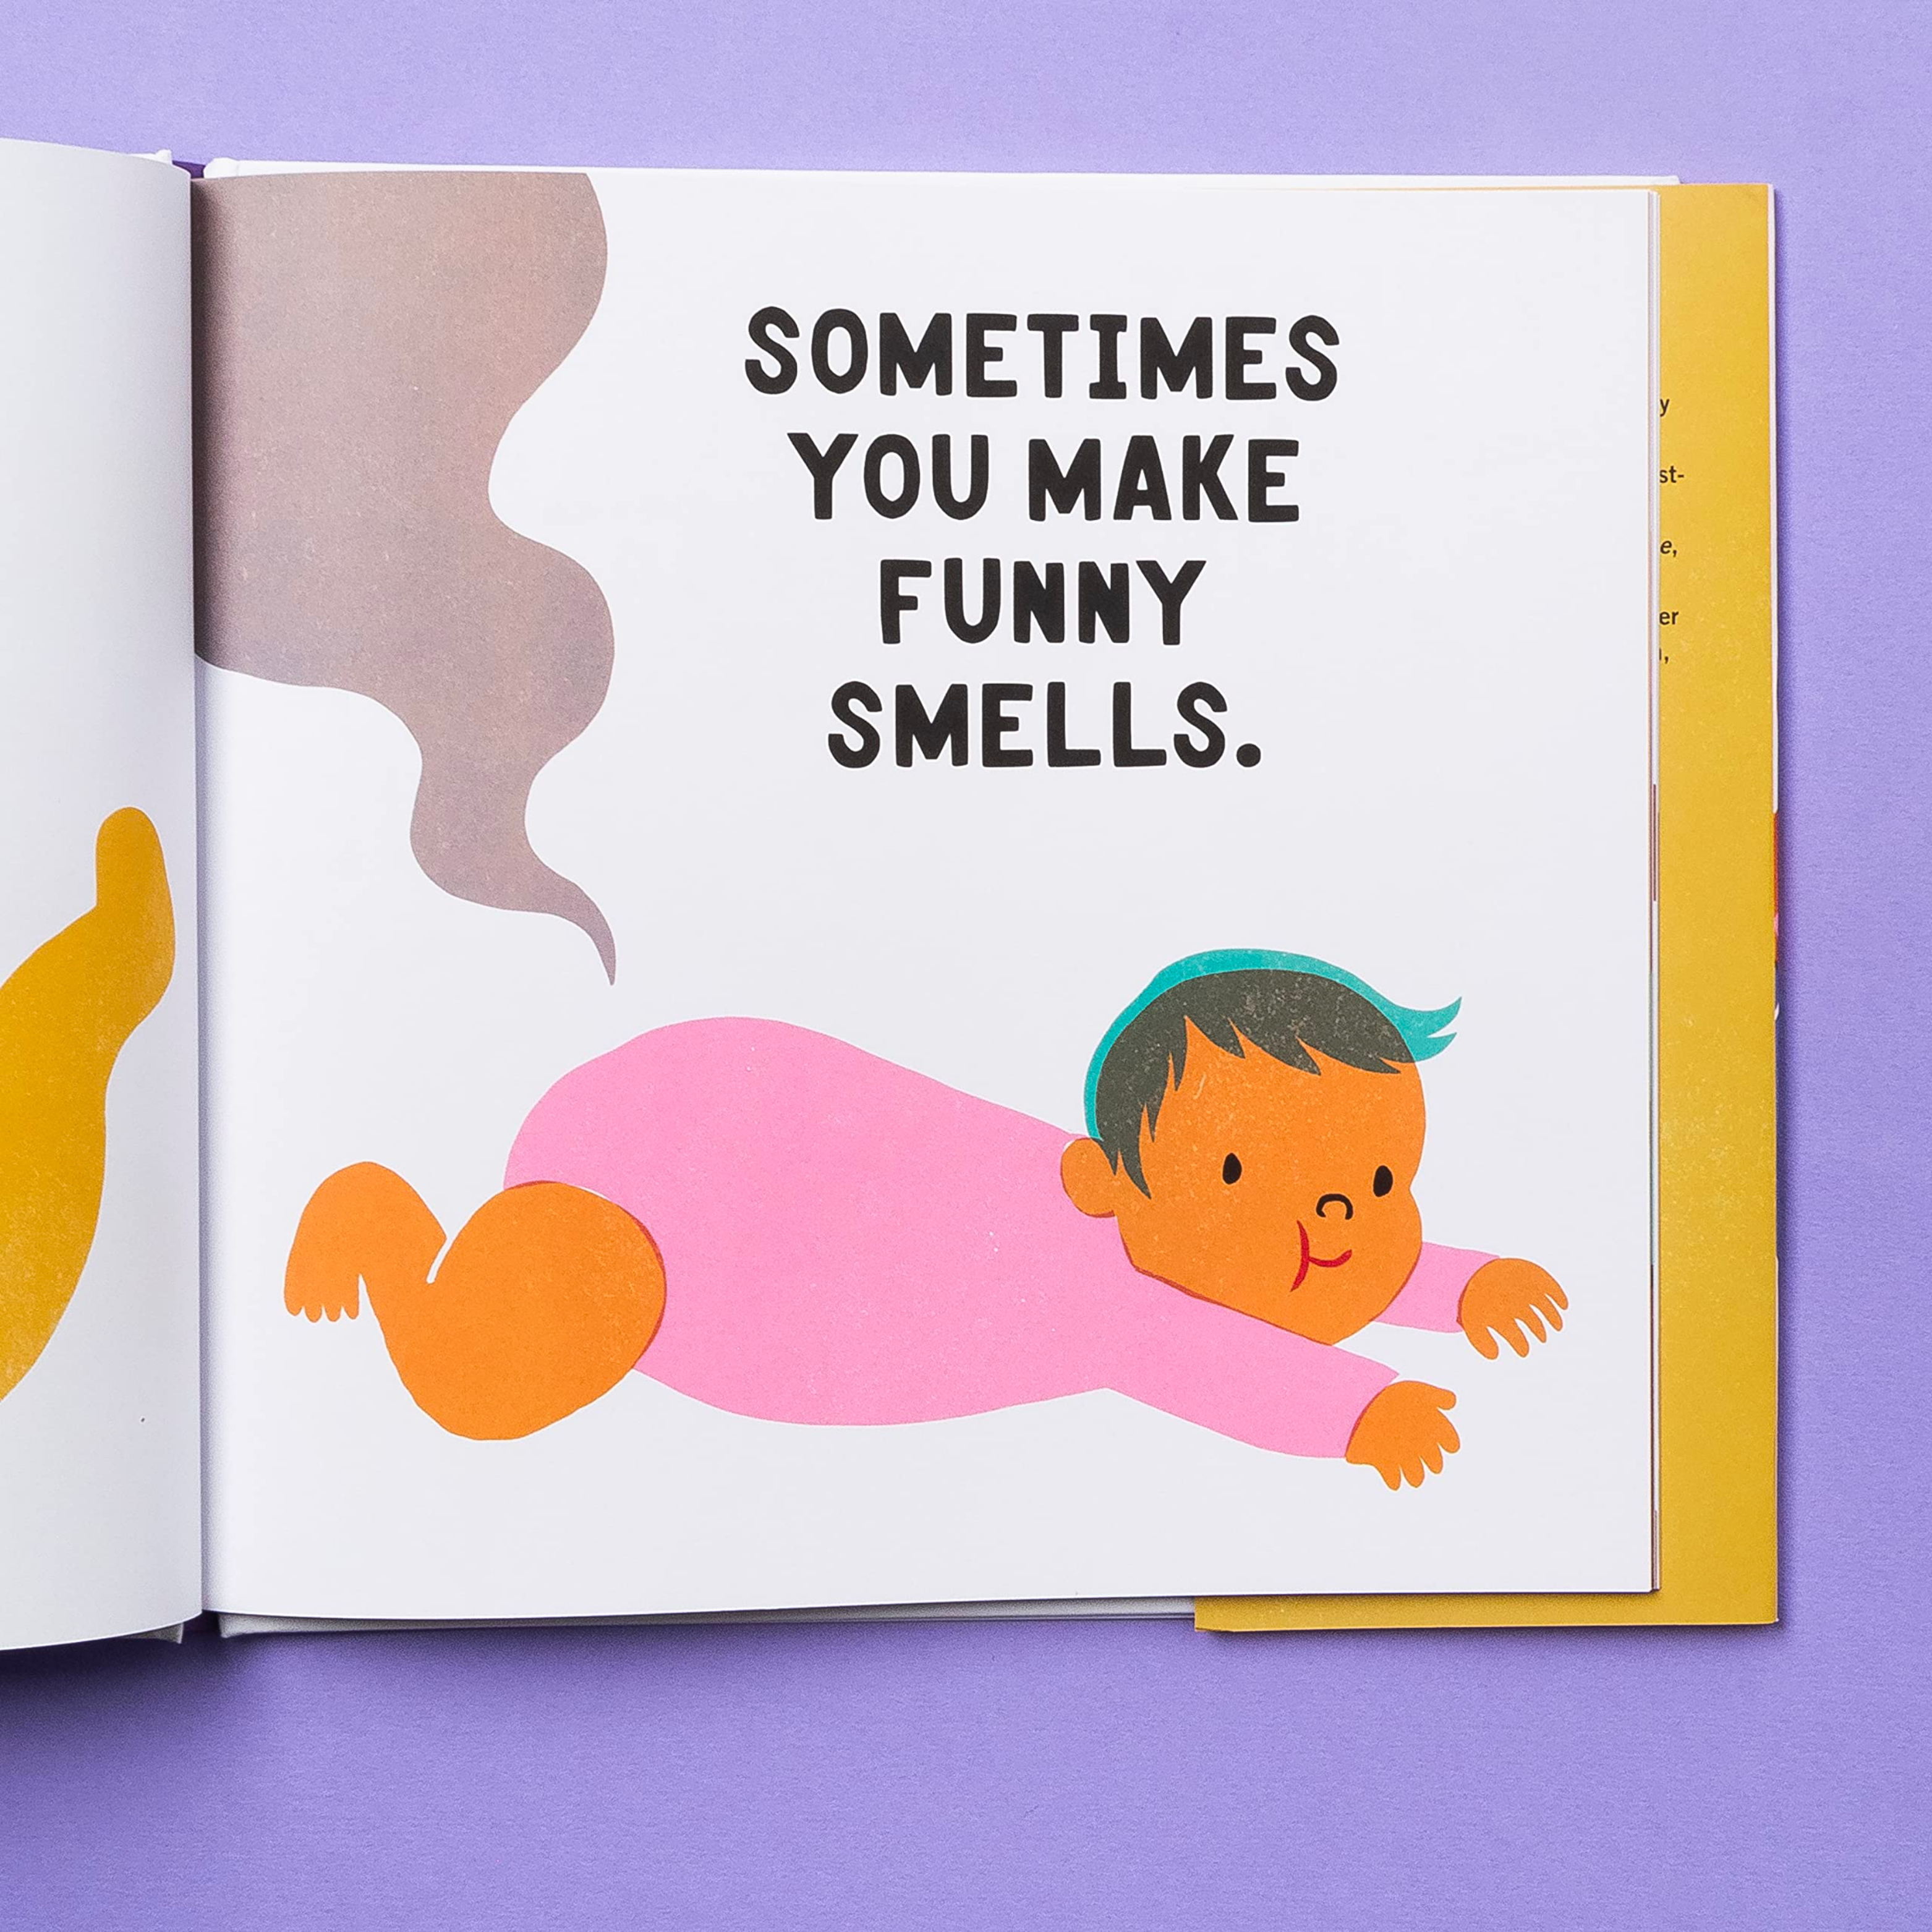 THIS IMAGE SHOWS THE BOOK OPEN TO A PAGE WHERE A BABY IS LAYING ON ITS BELLY AND THERES A SMELLY SIGNAL COMING FROM ITS DIAPER WITH TEXT THAT READS "SOMETIMES YOU MAKE FUNNY SMELLS"